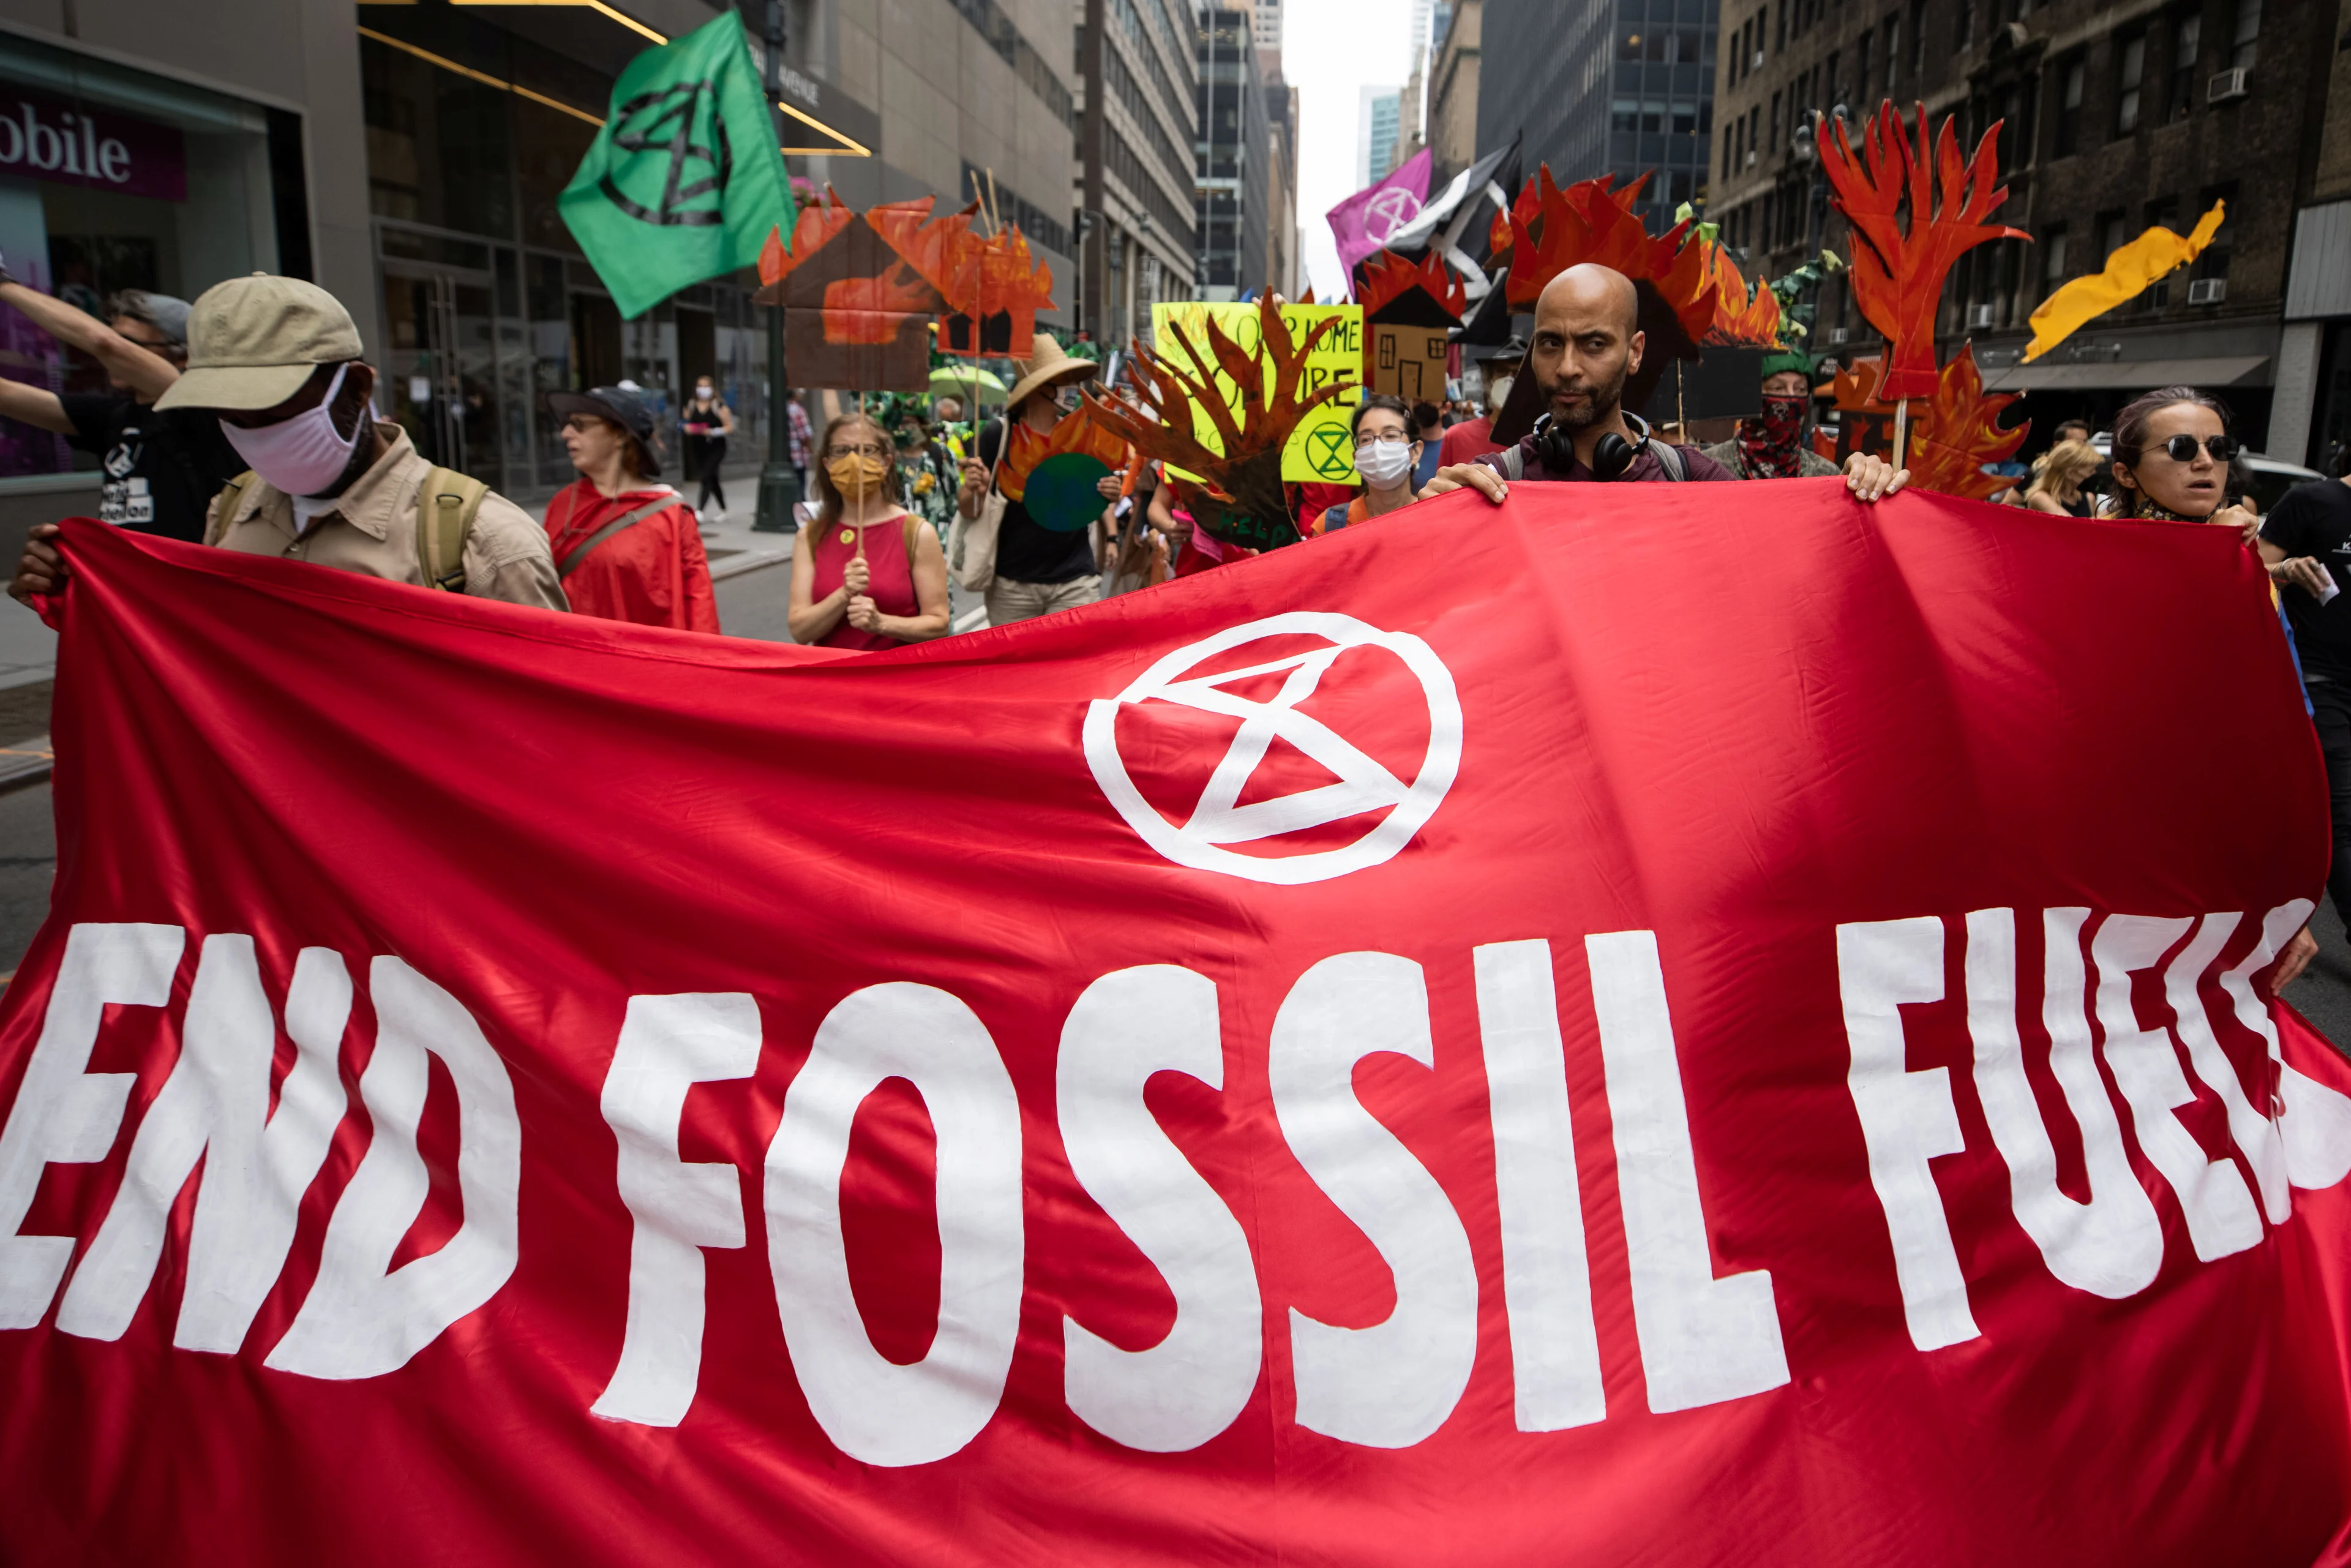 Reuters: FILE PHOTO: People protest during a 'non-violent resistance' climate change protest organized by Extinction Rebellion in the Manhattan borough of New York City, U.S., September 17, 2021. REUTERS/Caitlin Ochs